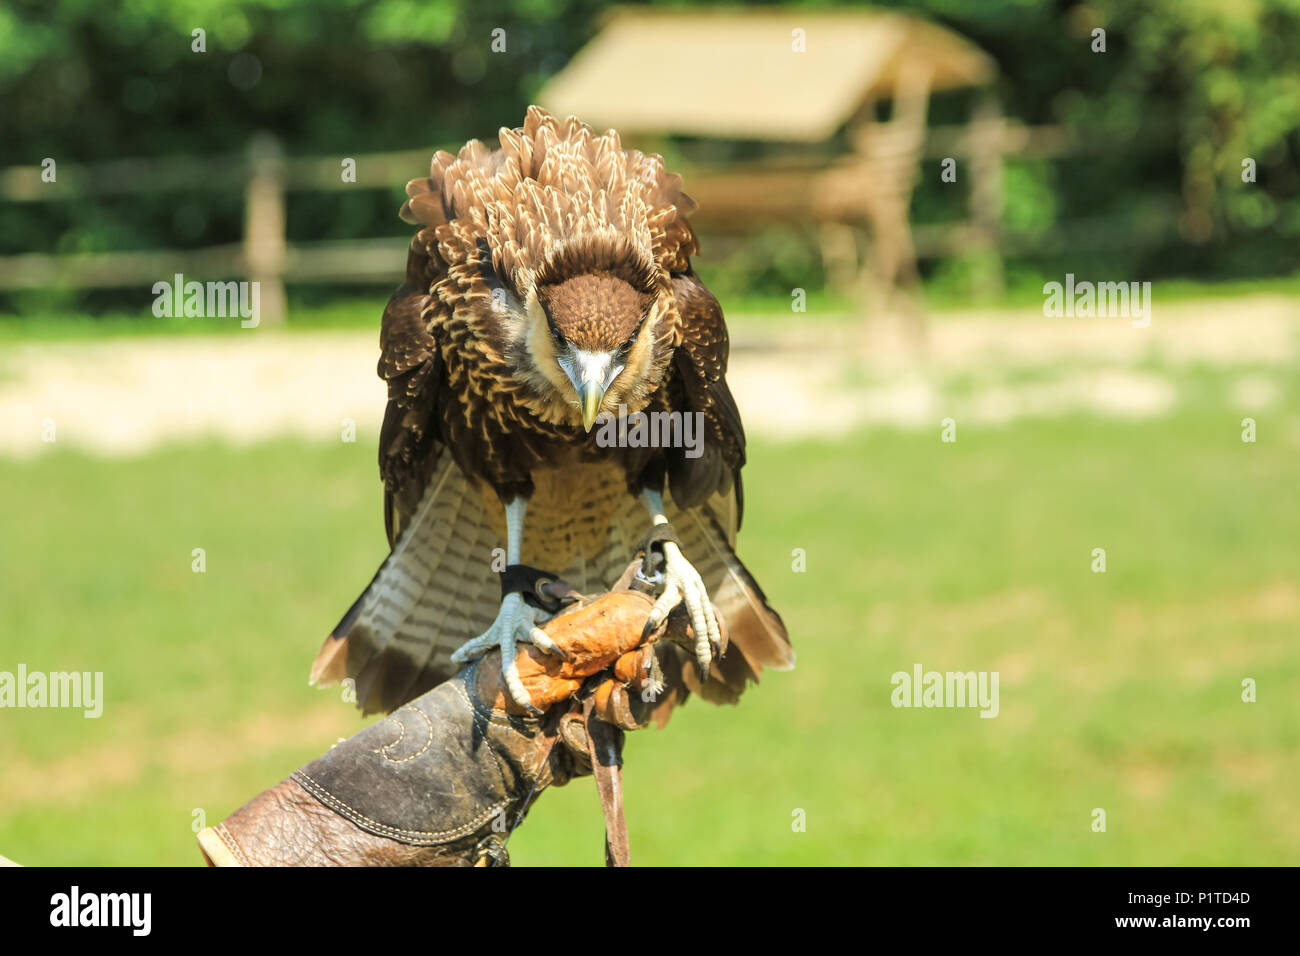 falconer with leather gloves holding a trained hawk. Falconry with birds of prey in the wildlife. Blurred background. Stock Photo